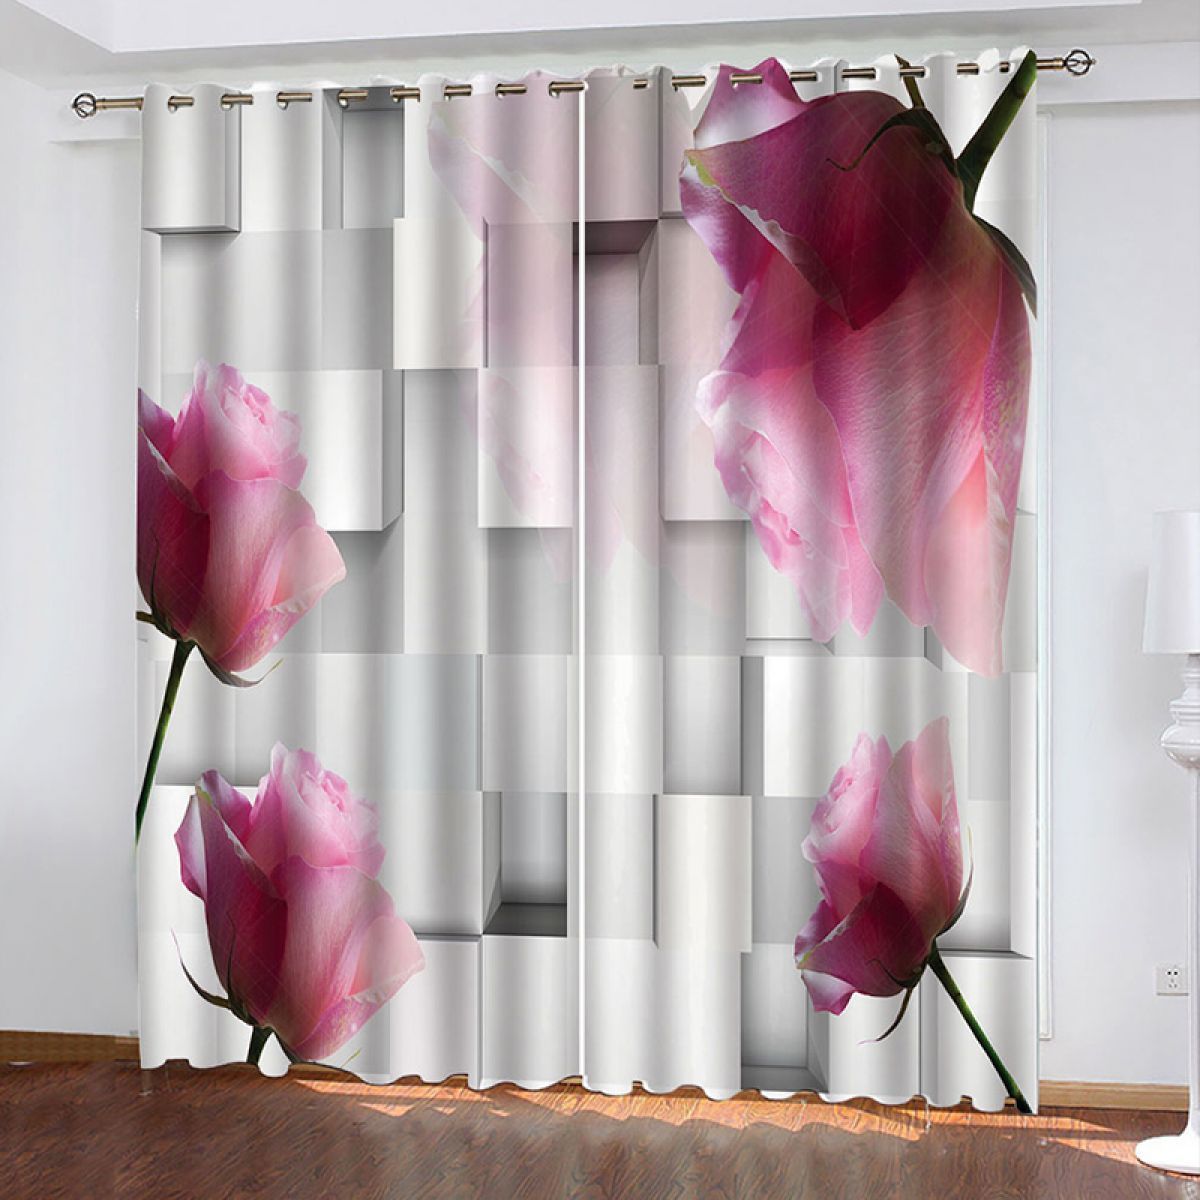 Modern 3d Geometric And Roses Printed Window Curtain Home Decor